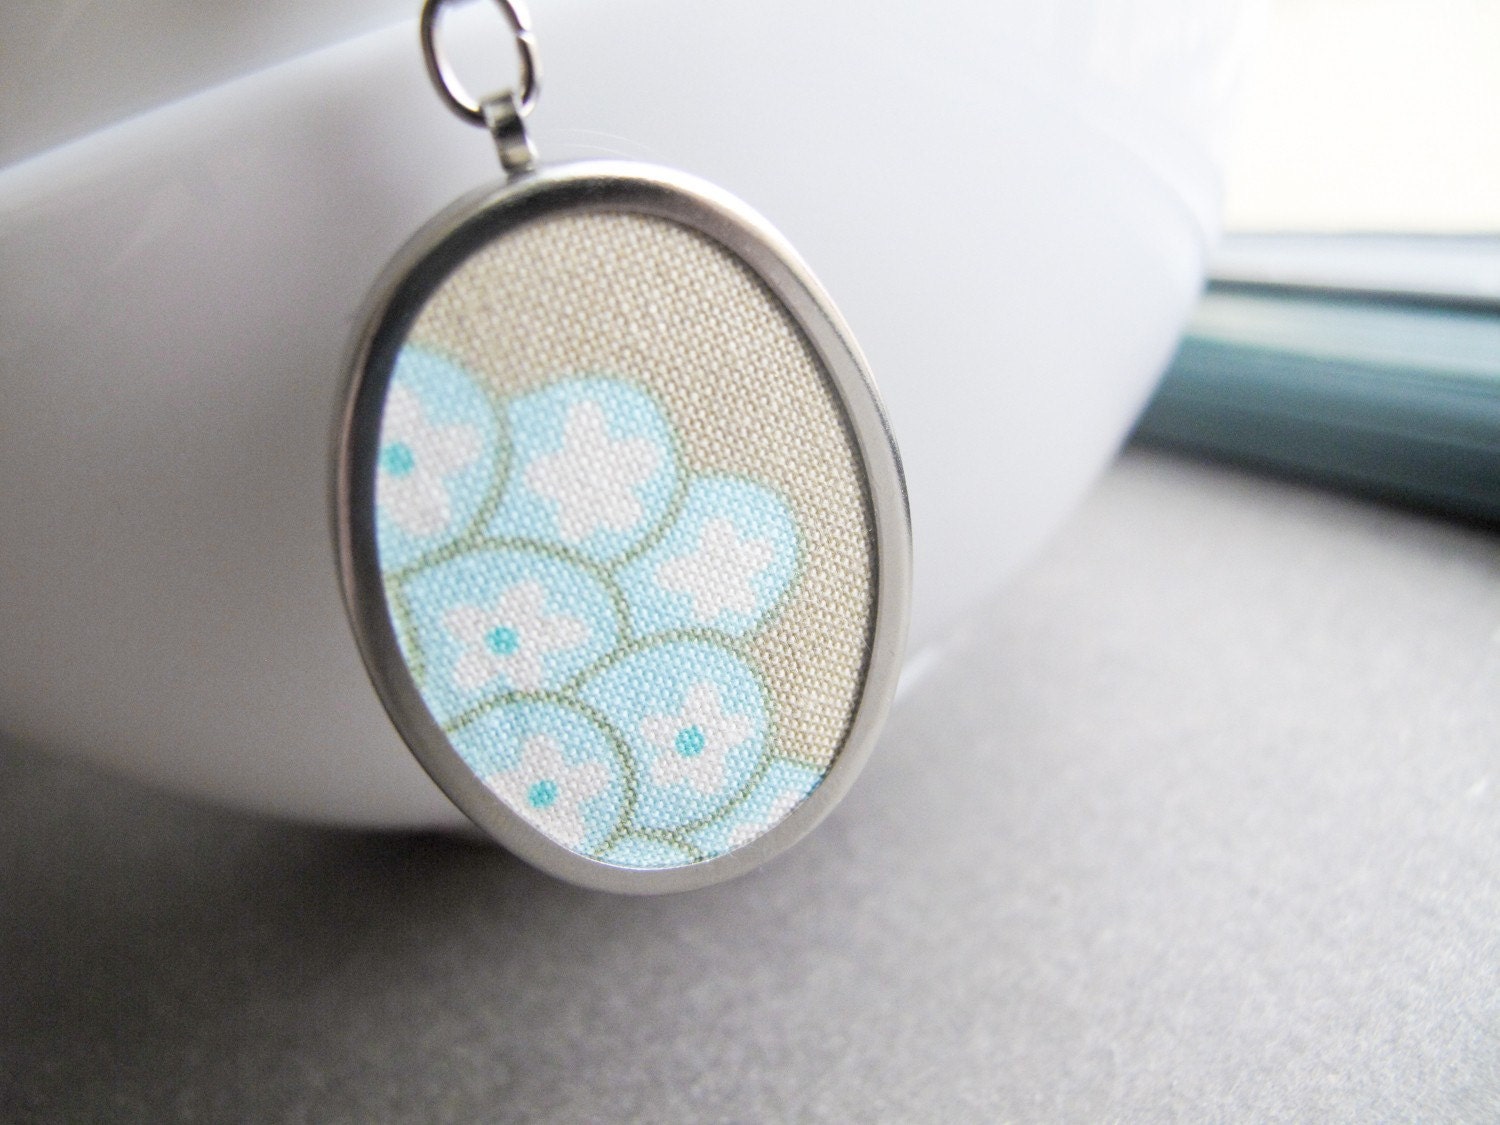 Cumulus Necklace in Cotton Fabric and Shiny Silver - READY TO SHIP